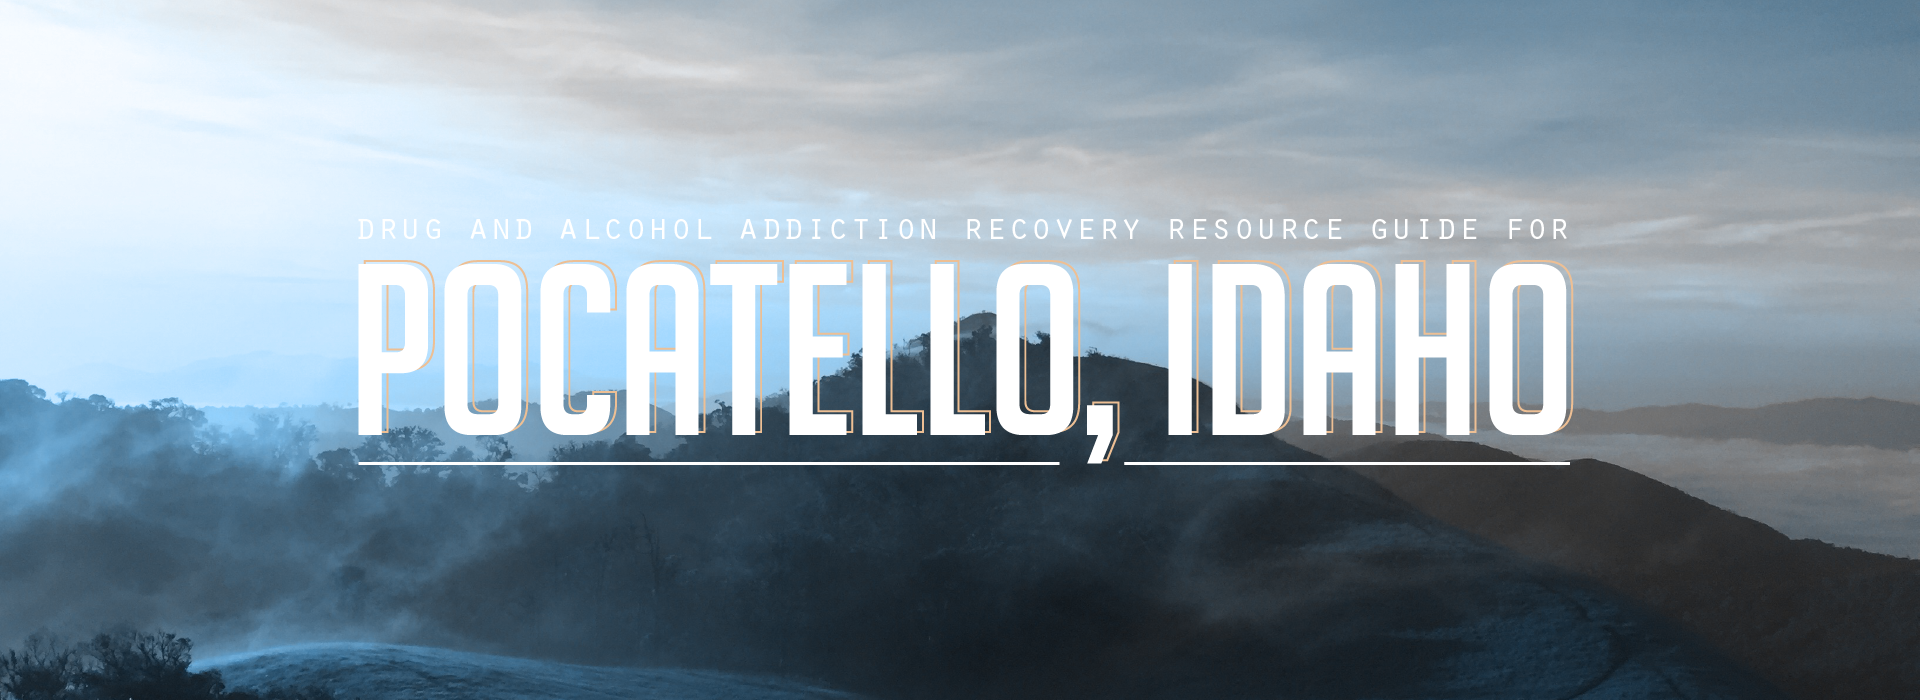 Drug and alcohol addiction recovery resource guide for pocatello, Idaho